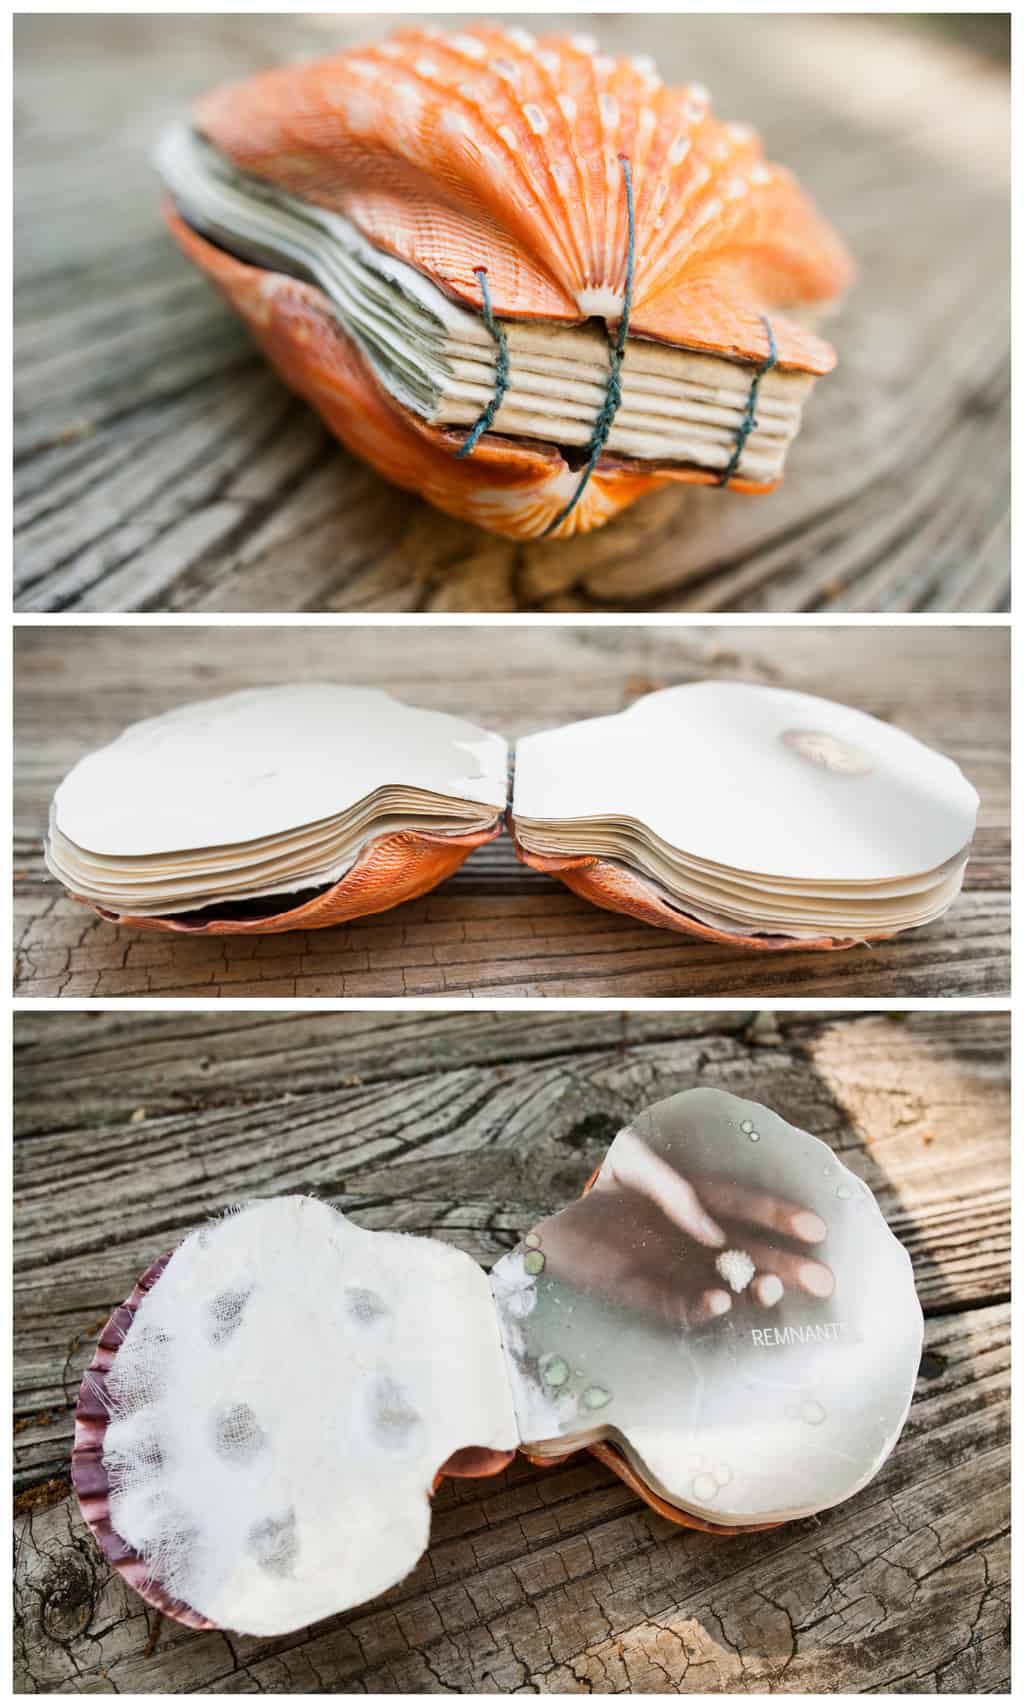 handmade artist's book made from paper, a seashell, and sewn binding